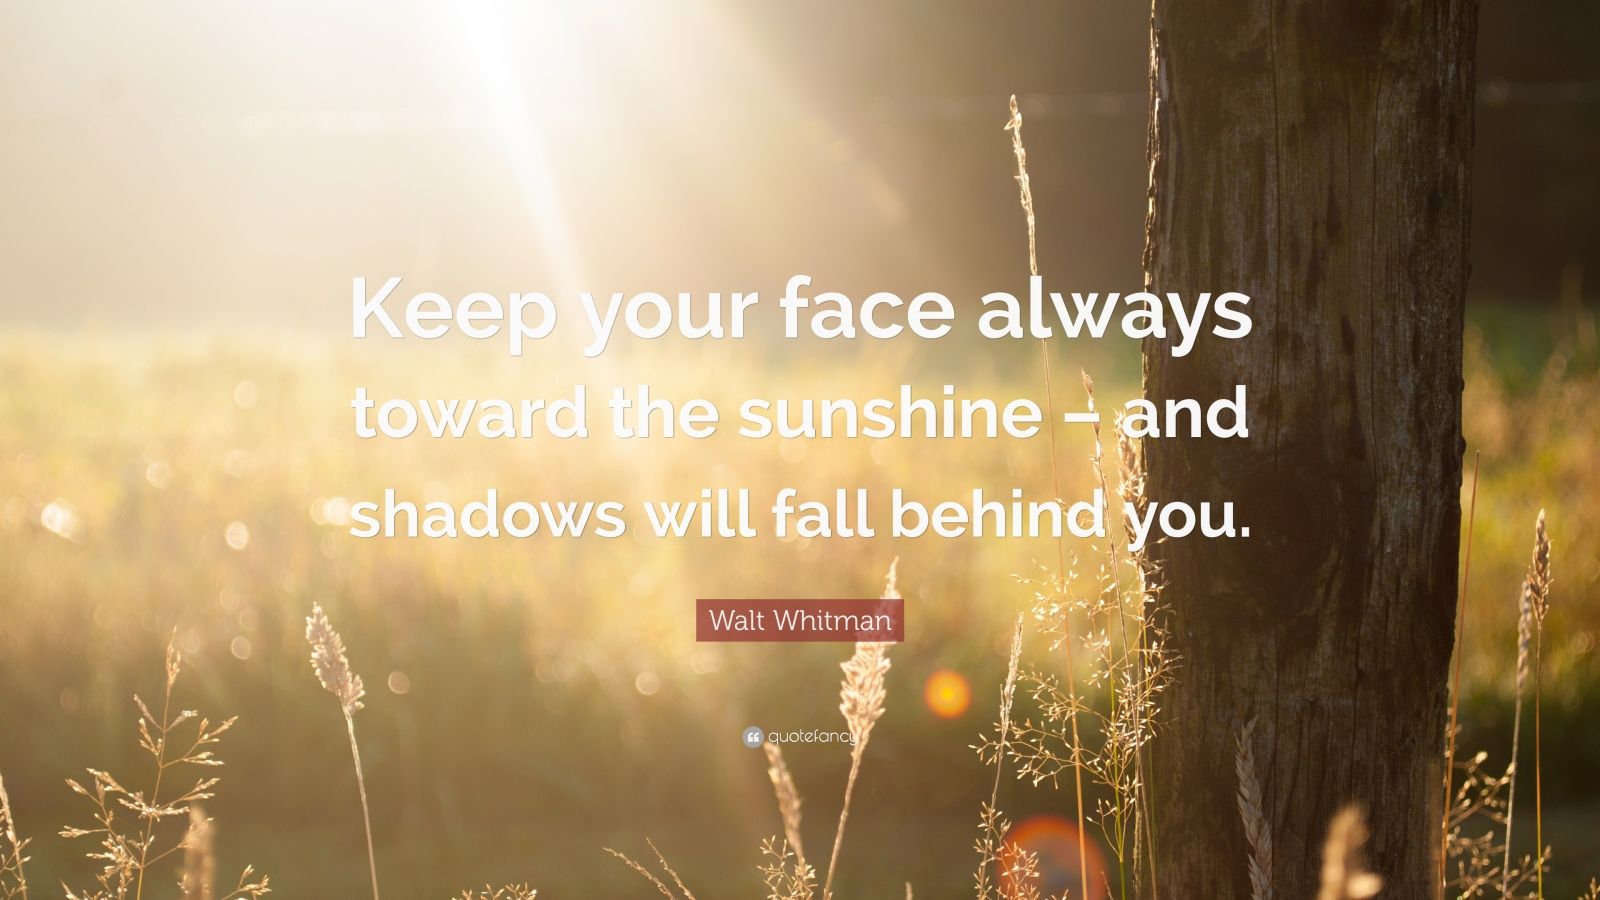 25369 Walt Whitman Quote Keep your face always toward the sunshine and